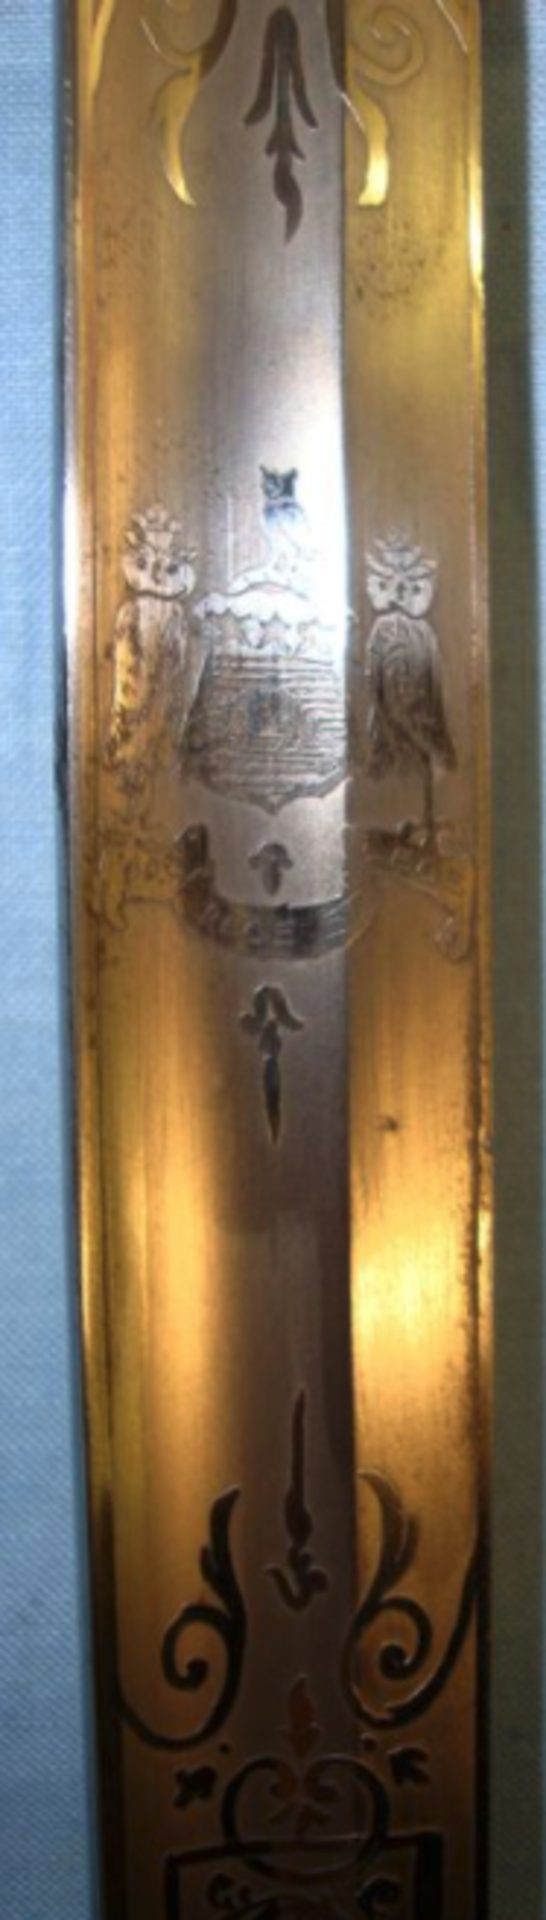 Victorian, British Pattern 1845 Infantry Officers' Sword With Etched Blade Including Arms Of The - Image 2 of 3